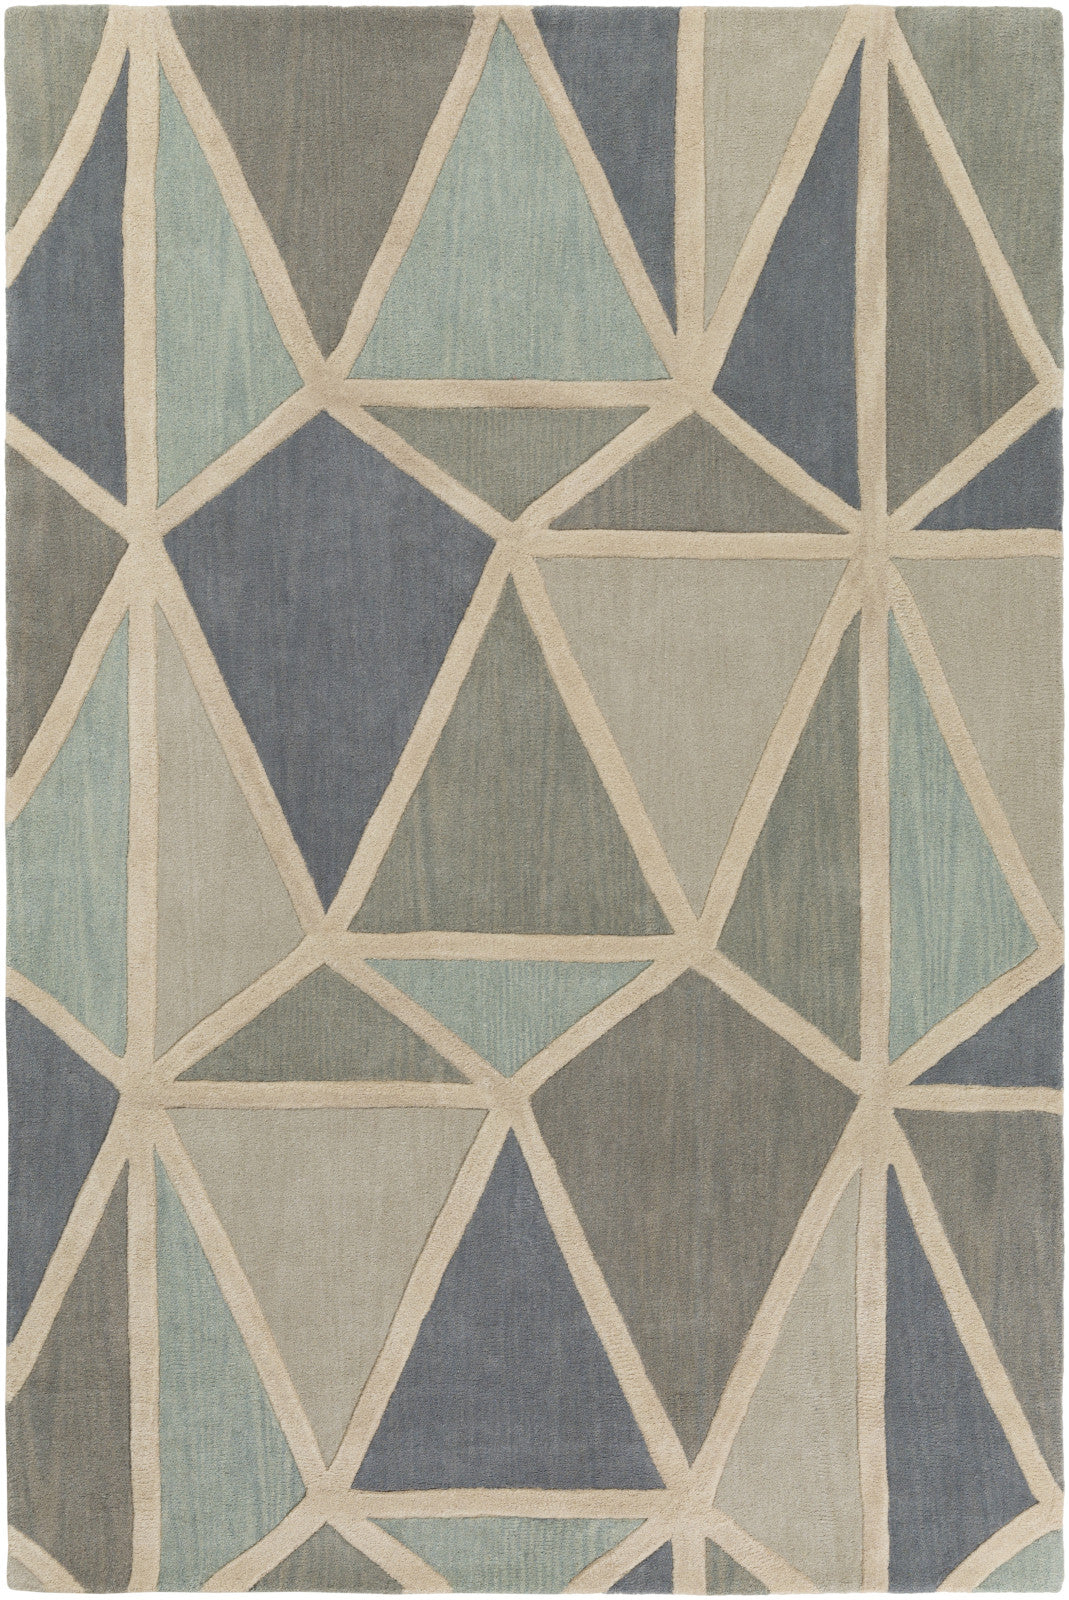 Oasis OAS-1119 White Area Rug by Surya